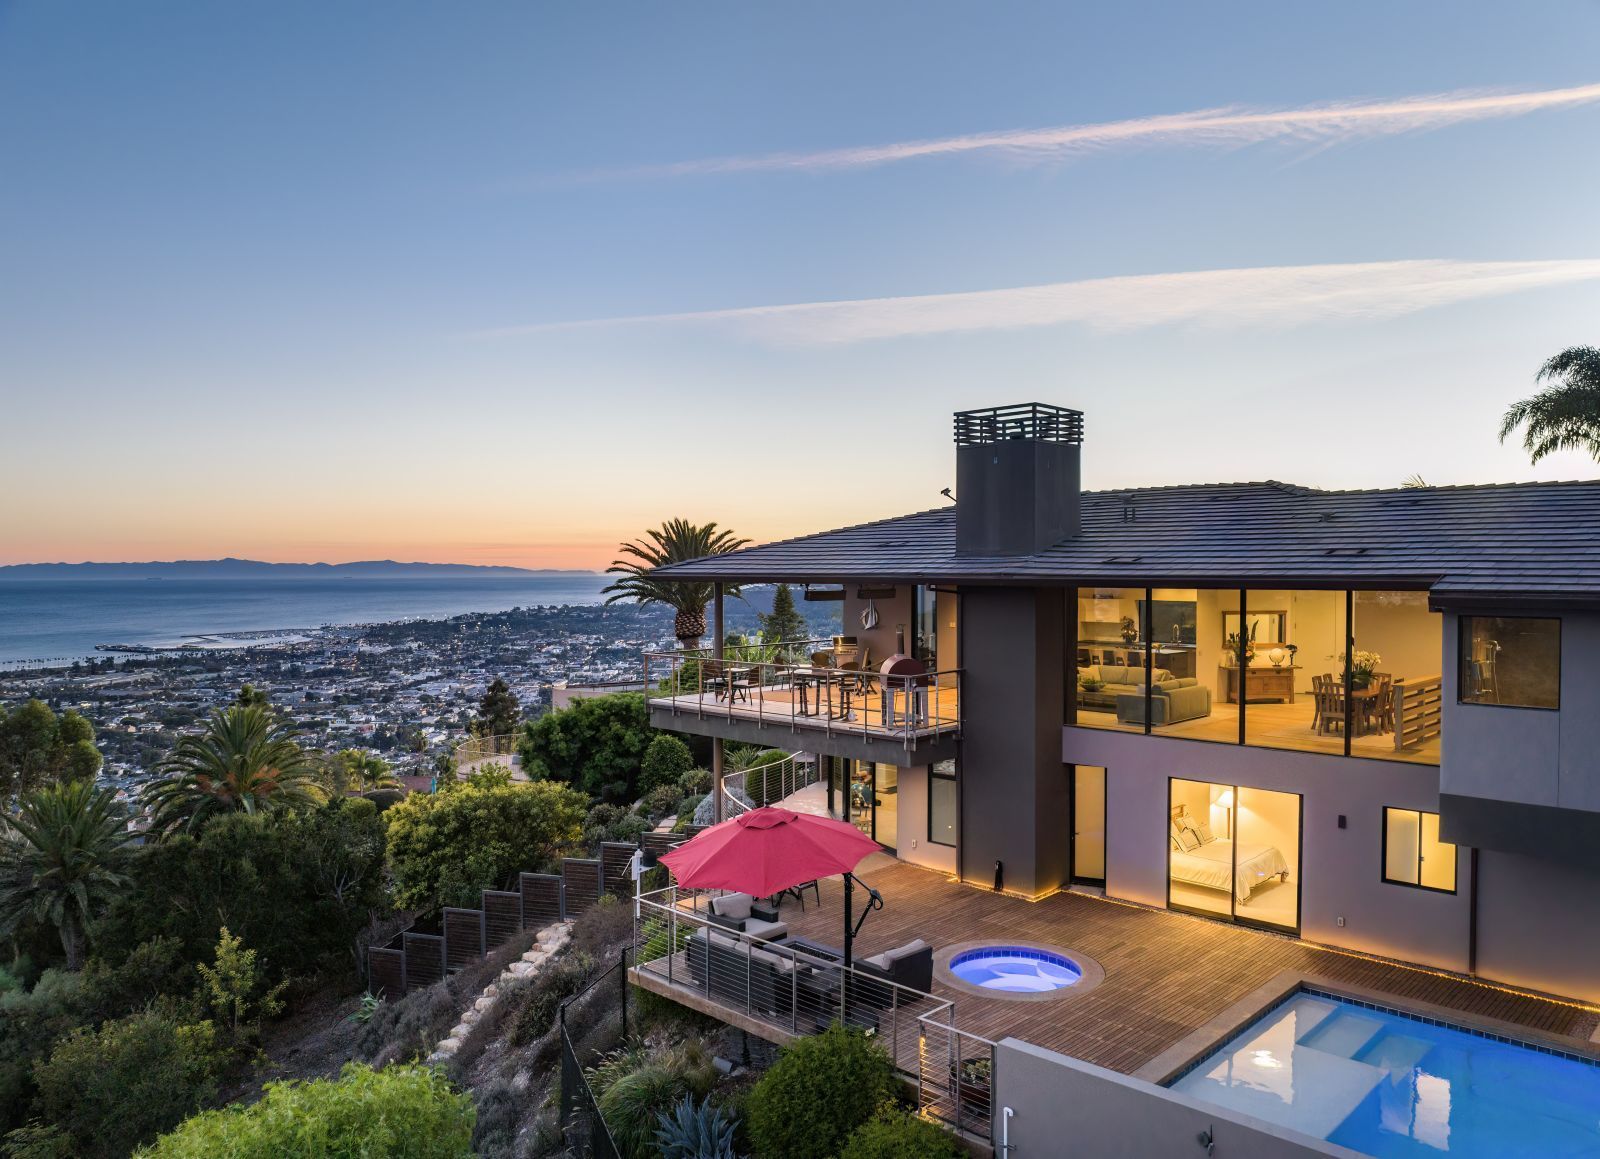 A contemporary Santa Barbara home illuminated within and looking out over the city and the ocean